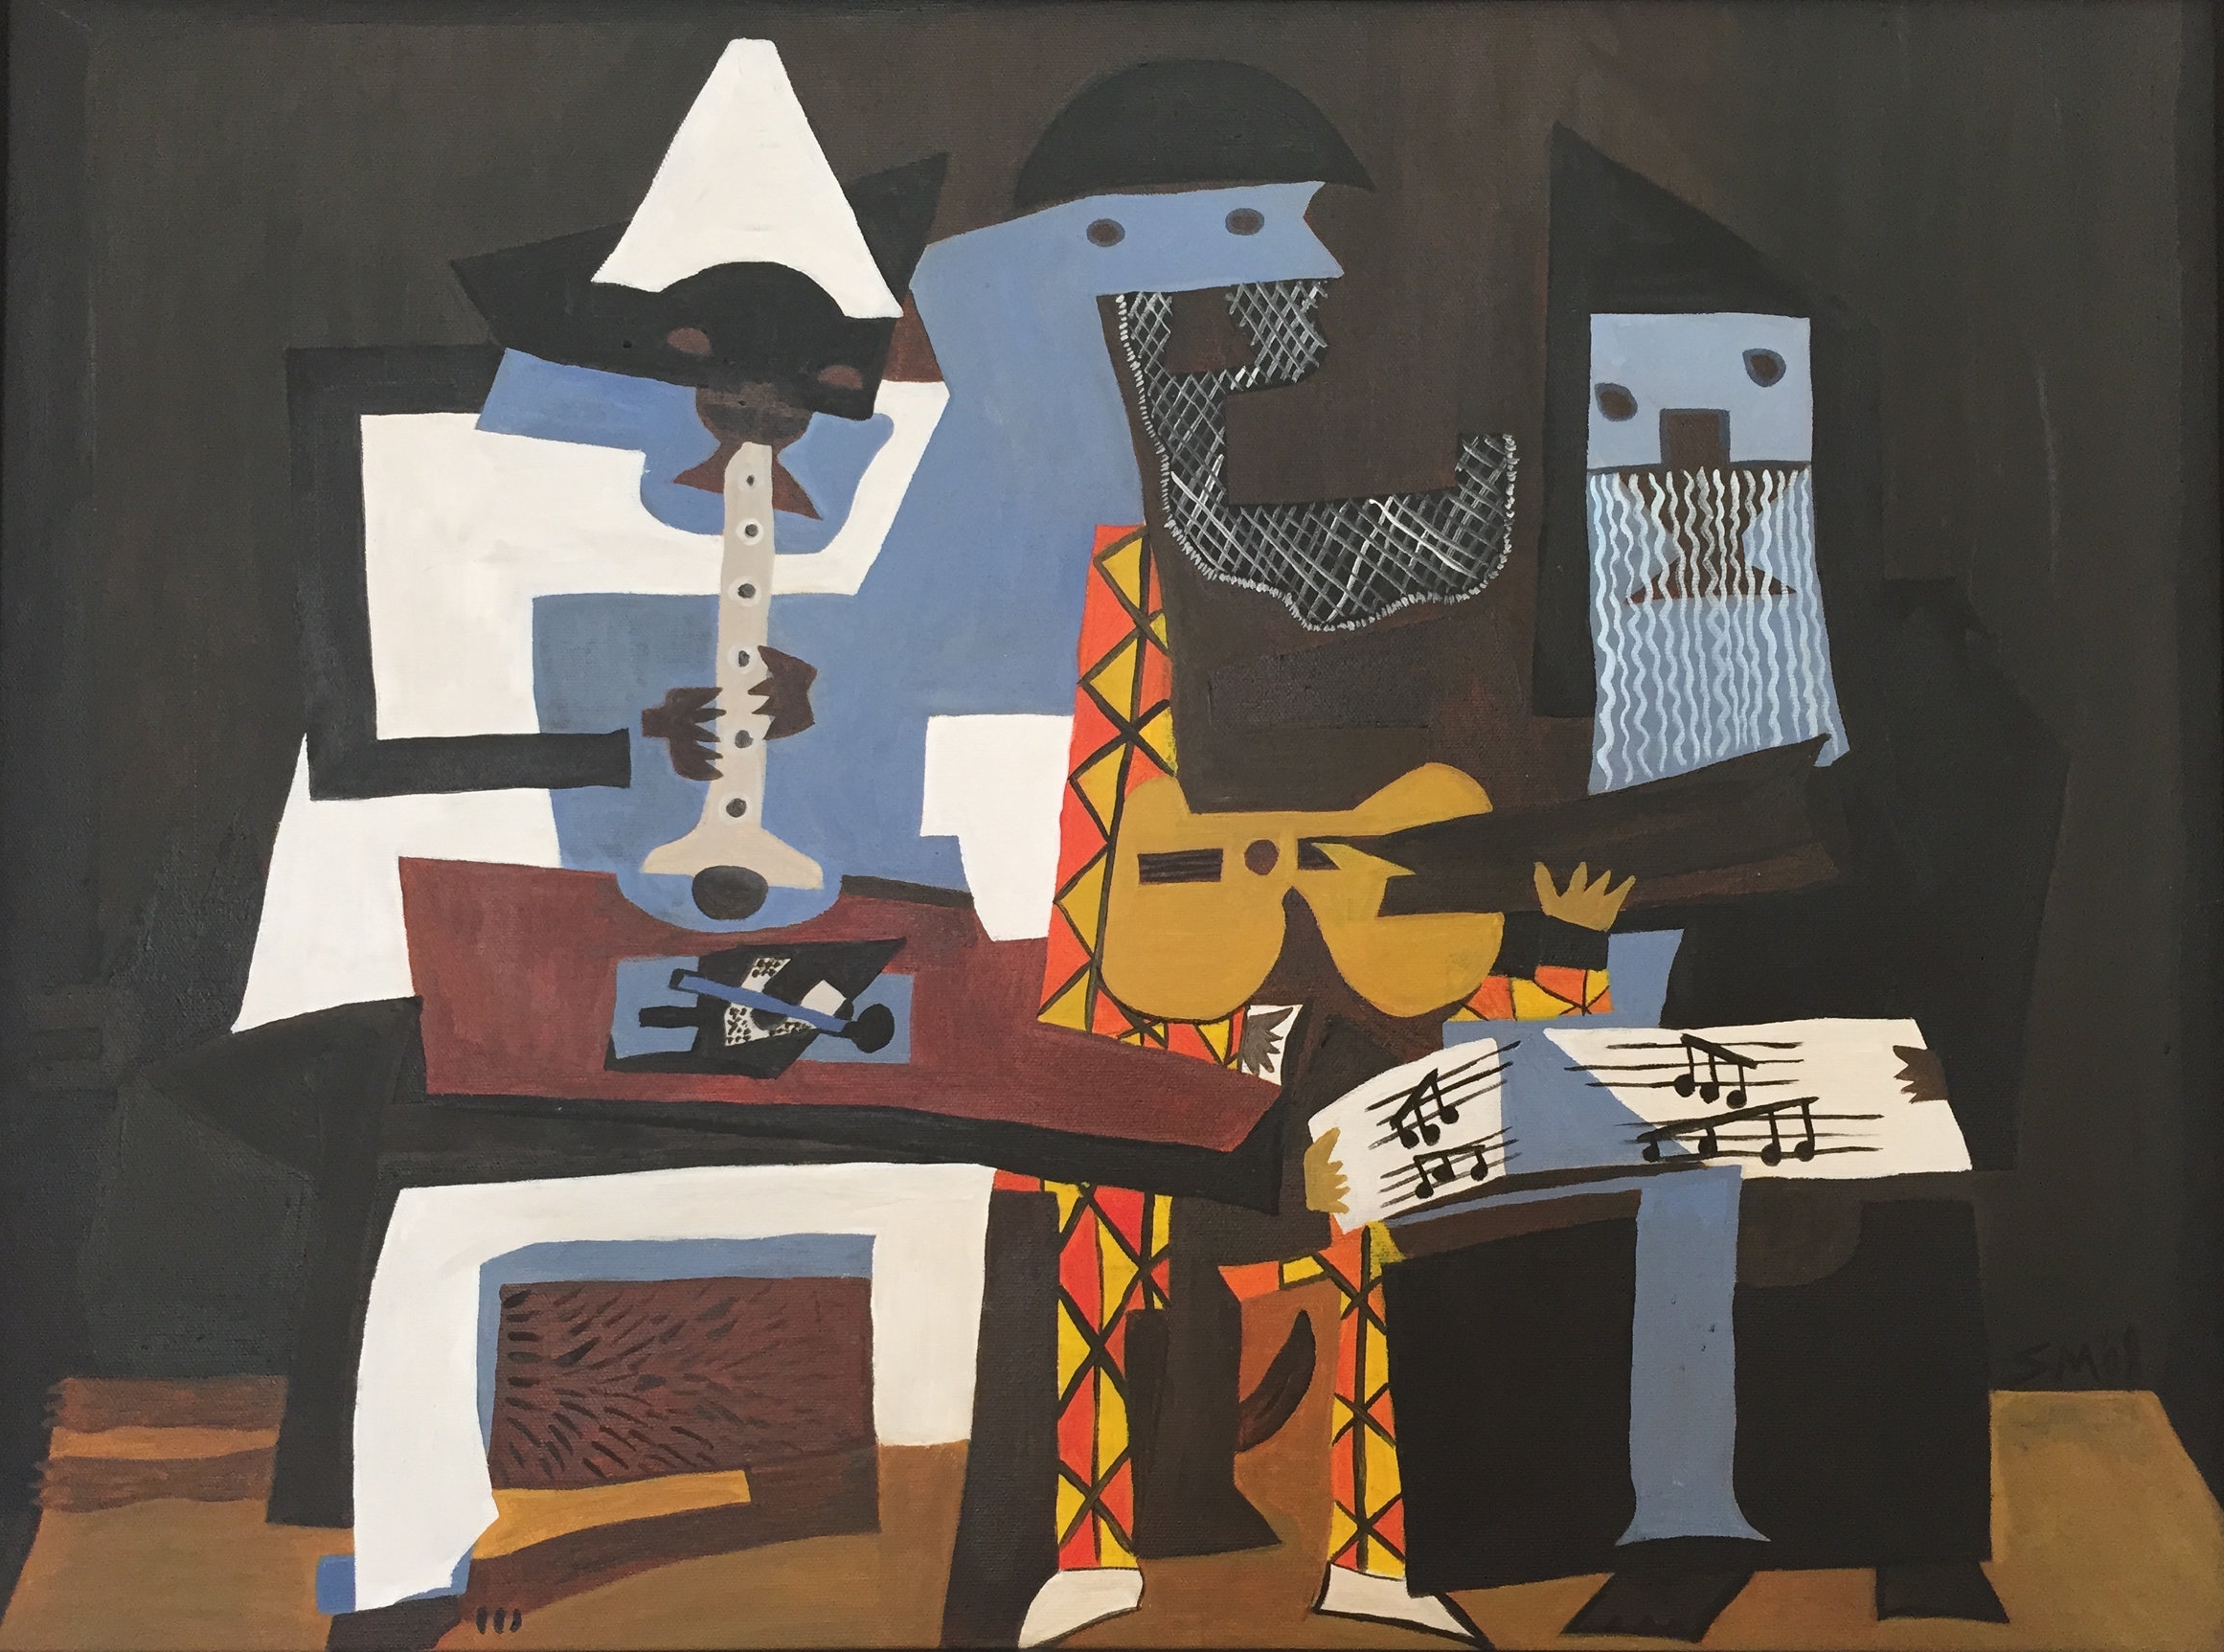 Inspired by Picasso's Three Musicians